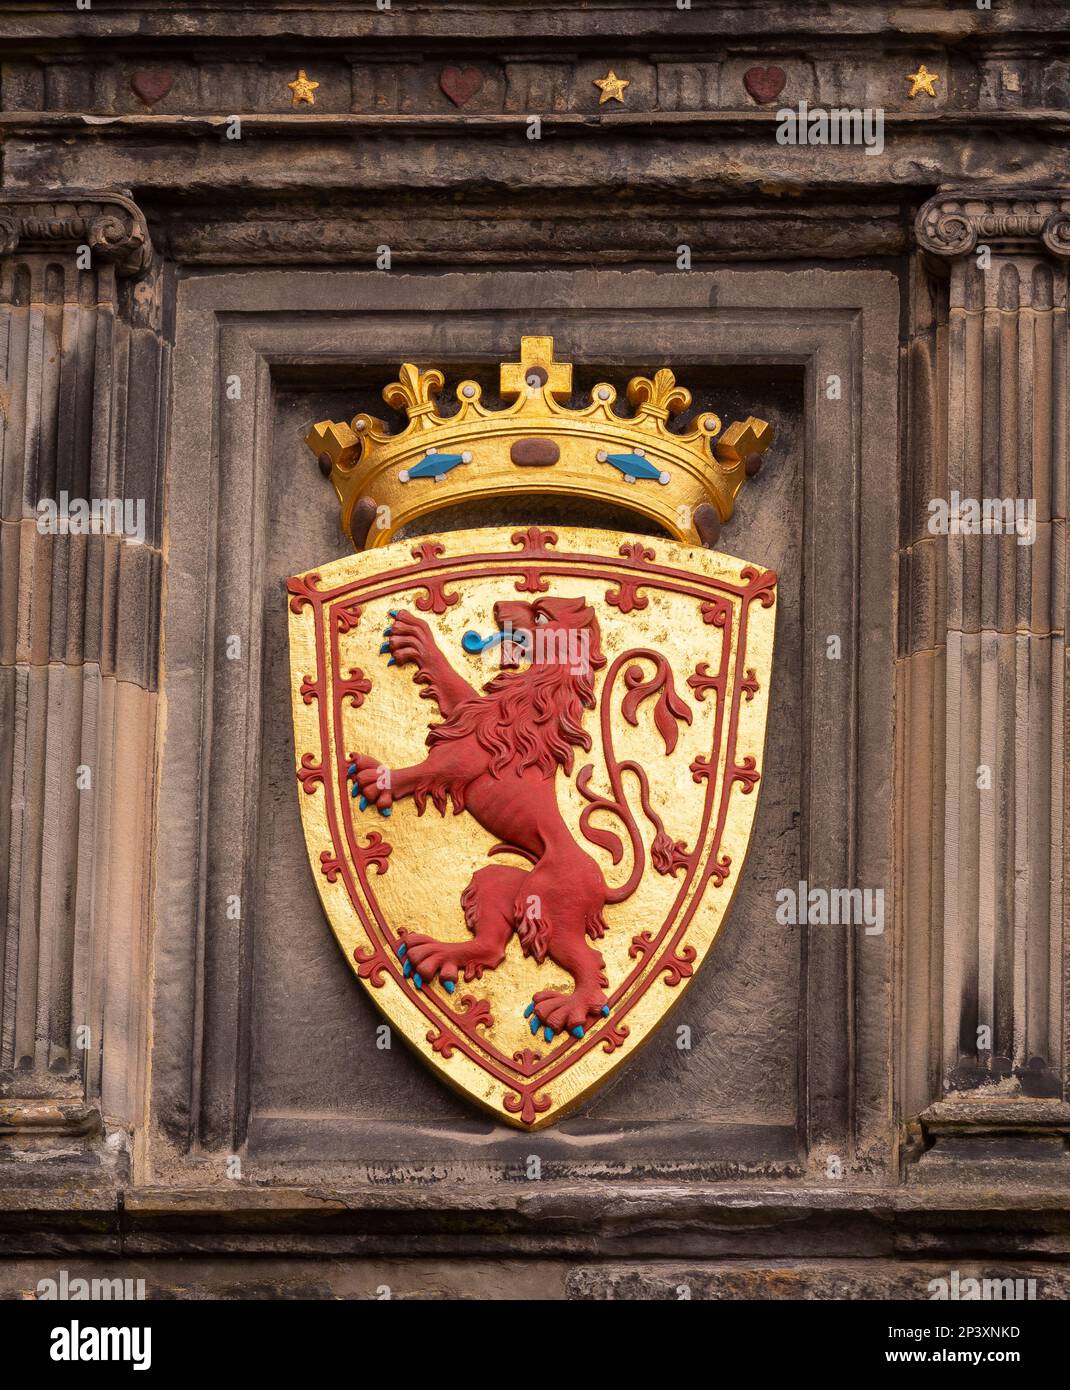 EDINBURGH, SCOTLAND, EUROPE - Royal Coat of Arms at Portcullis Gate in Edinburgh Castle. Includes The Lion Rampant and the royal crown of Scotland. Stock Photo